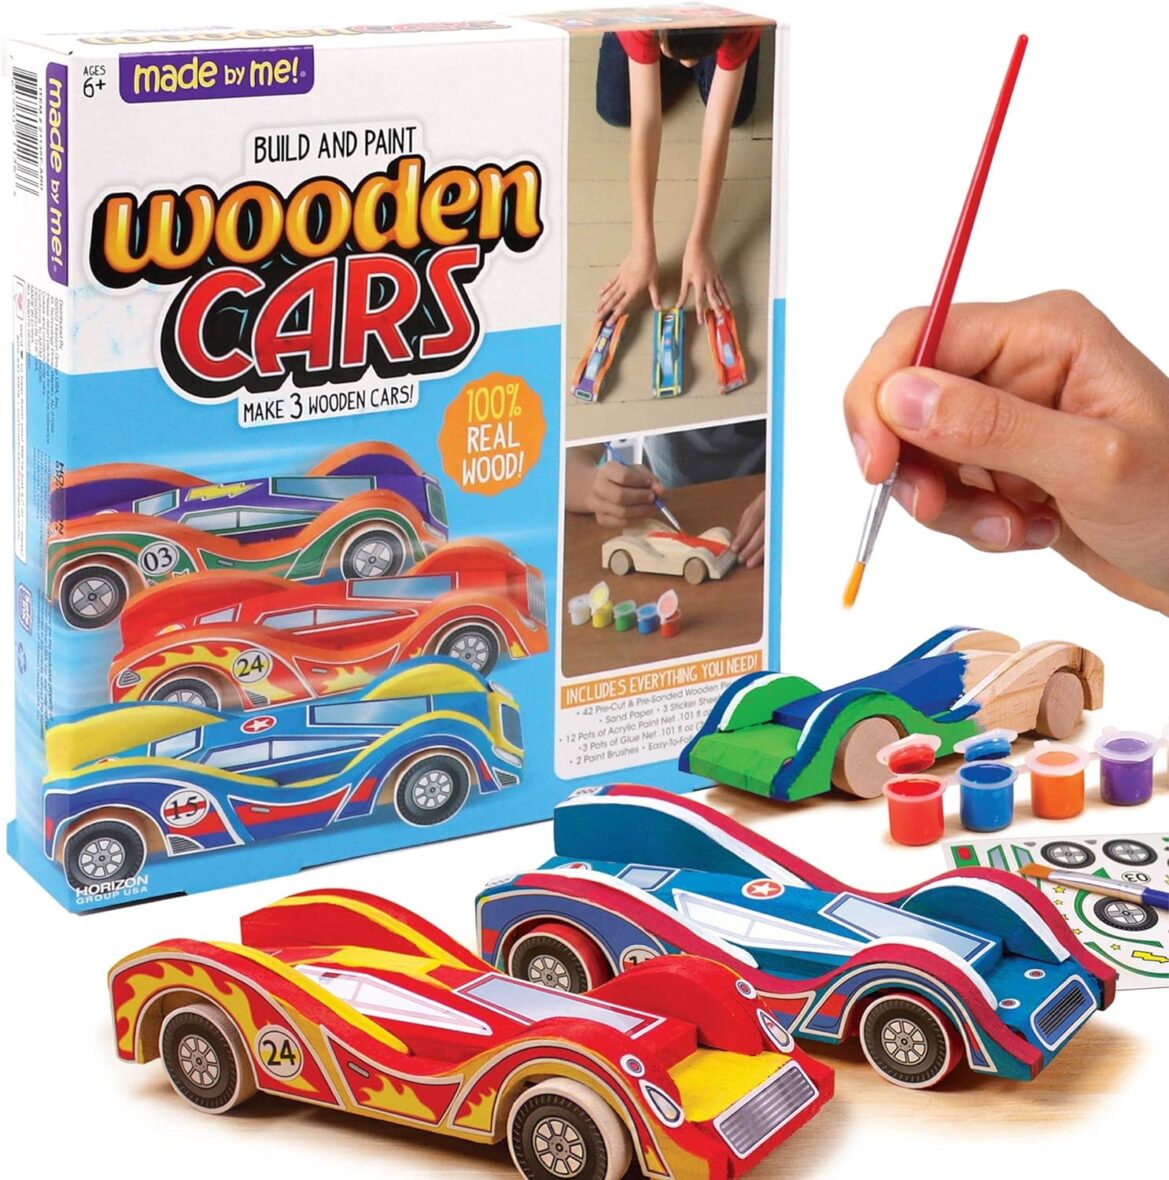 Made By Me Build & Paint Your Own Wooden Cars – DIY Wood Craft Kit, Easy To Assemble and 3 Race – Arts Crafts Kit for Kids Ages 6 And Up